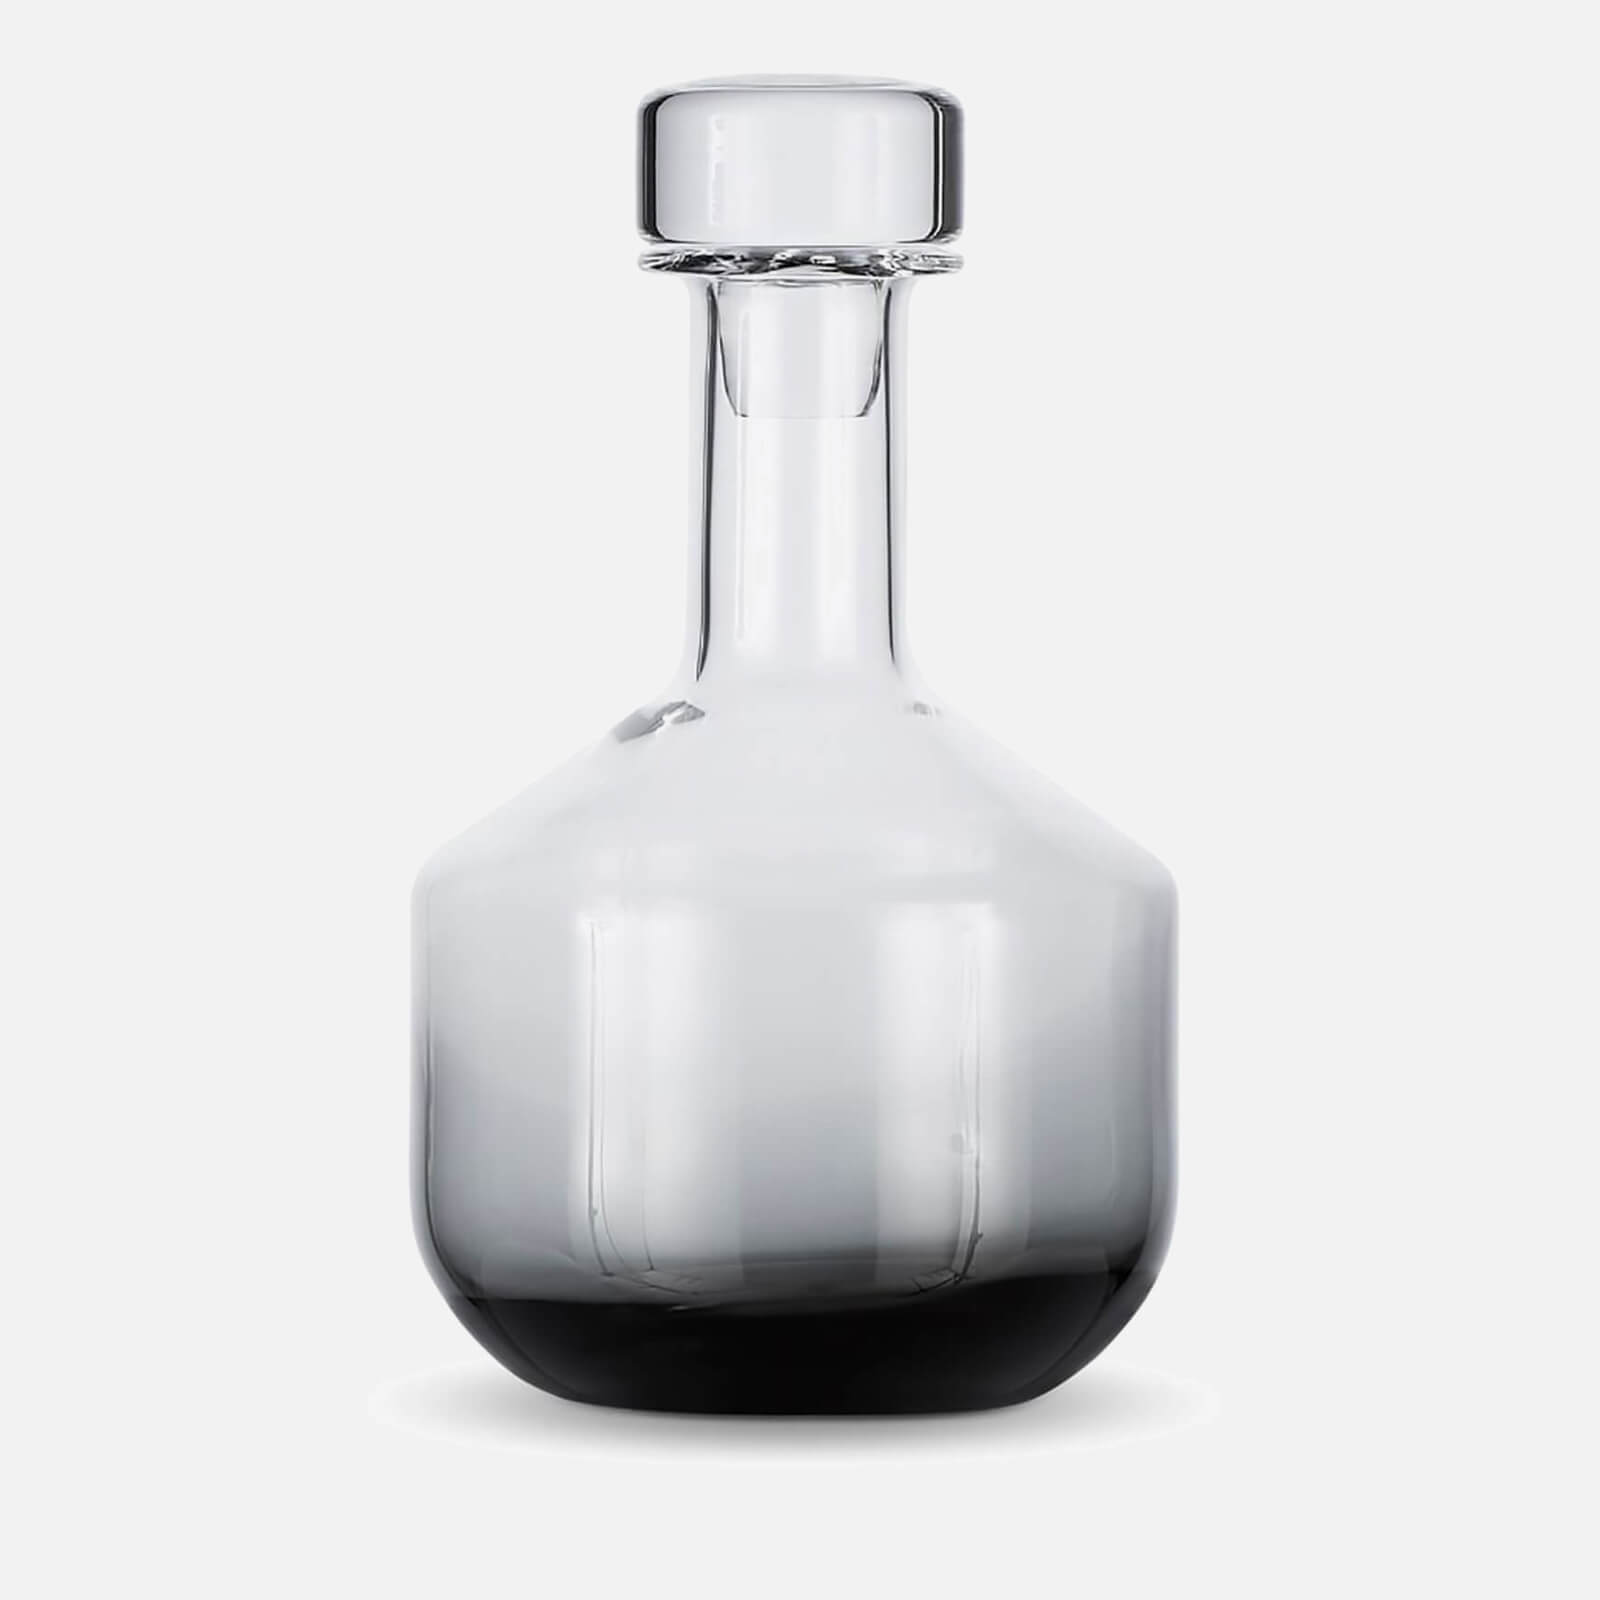 Photos - Other Accessories Tom Dixon Tank Whiskey Decanter - Black TKWD01B